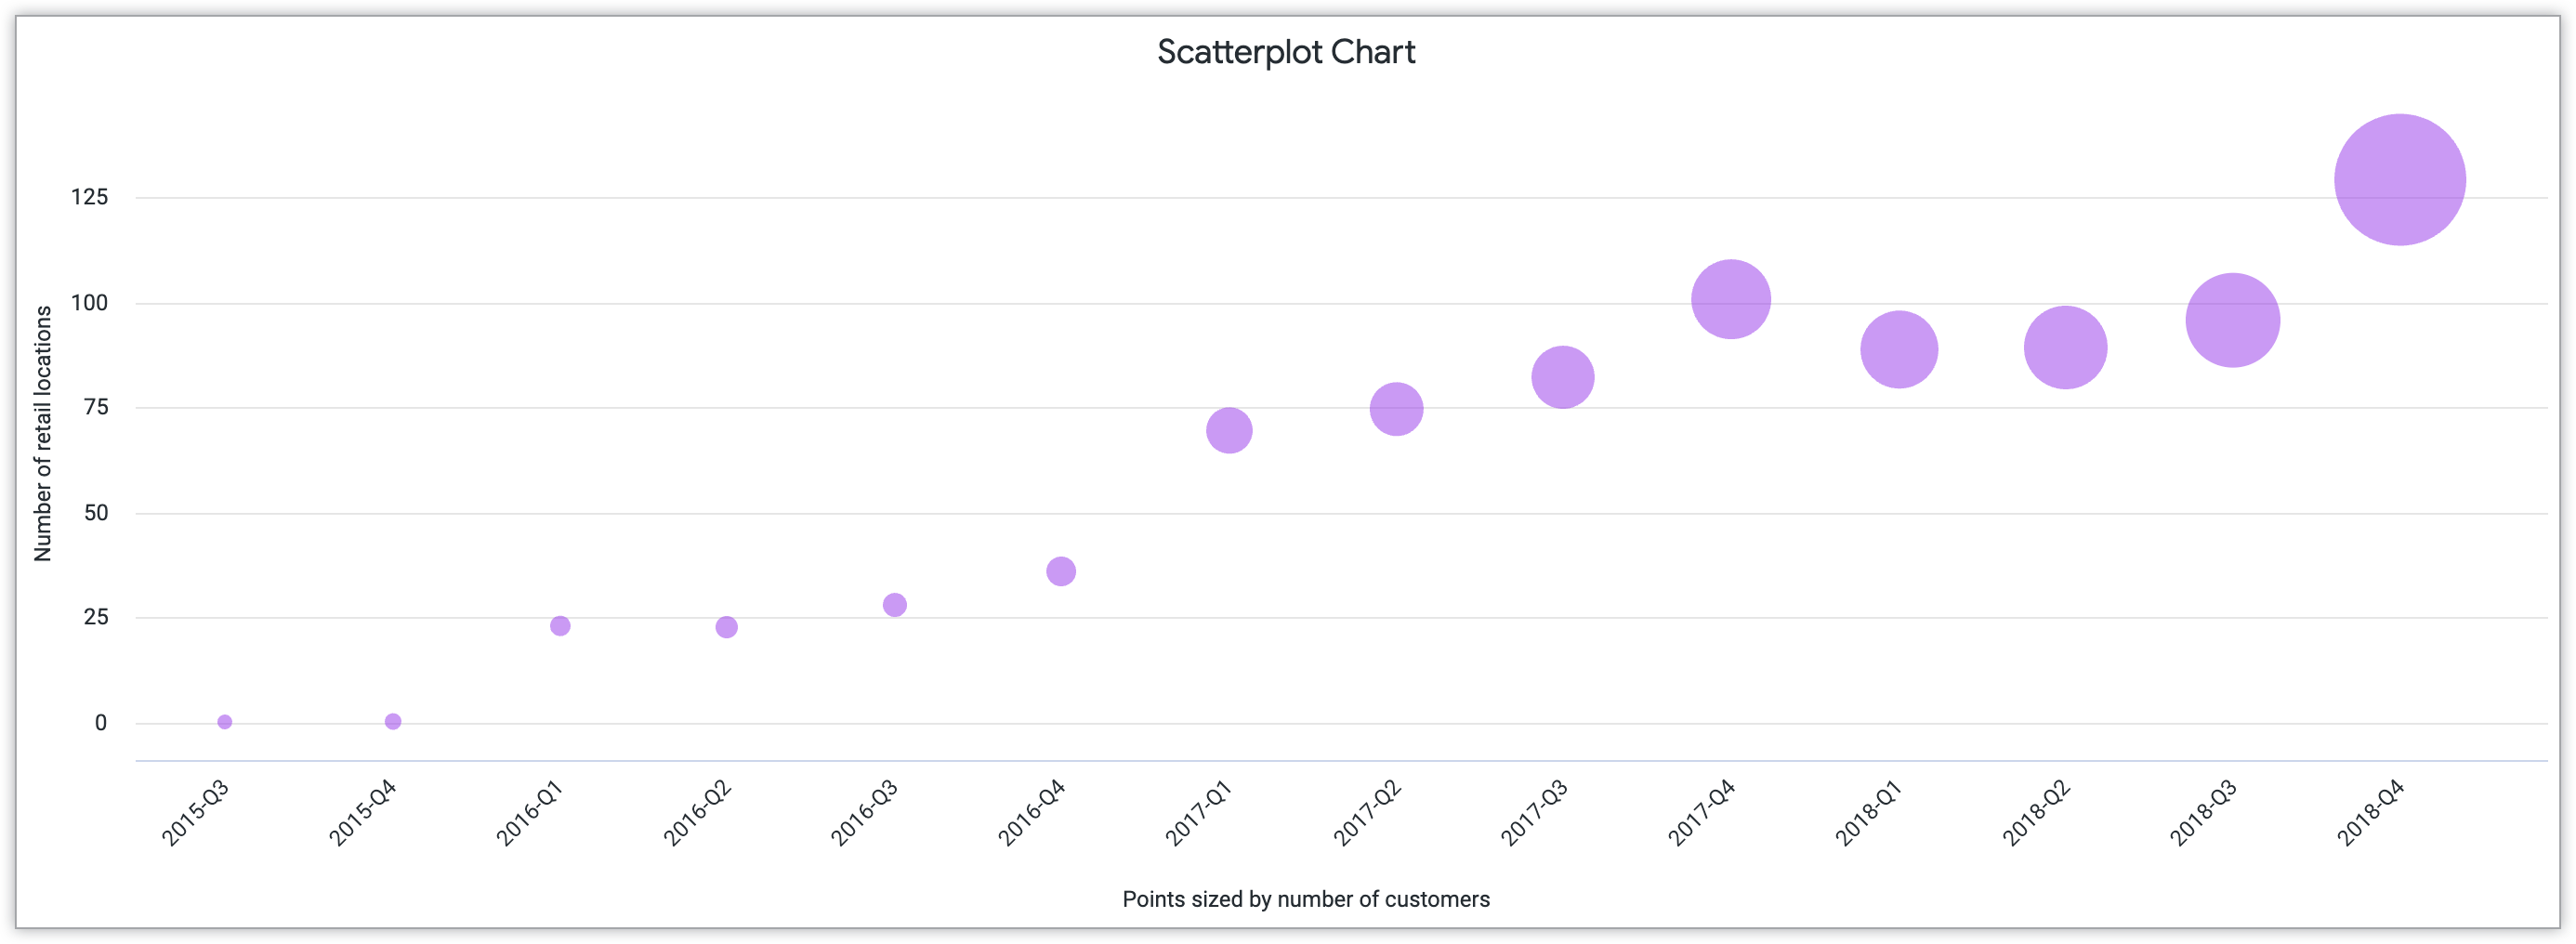 Scatterplot chart with Number of Retail Locations on the y-axis and quarters from 2015 to 2018 on the x-axis.